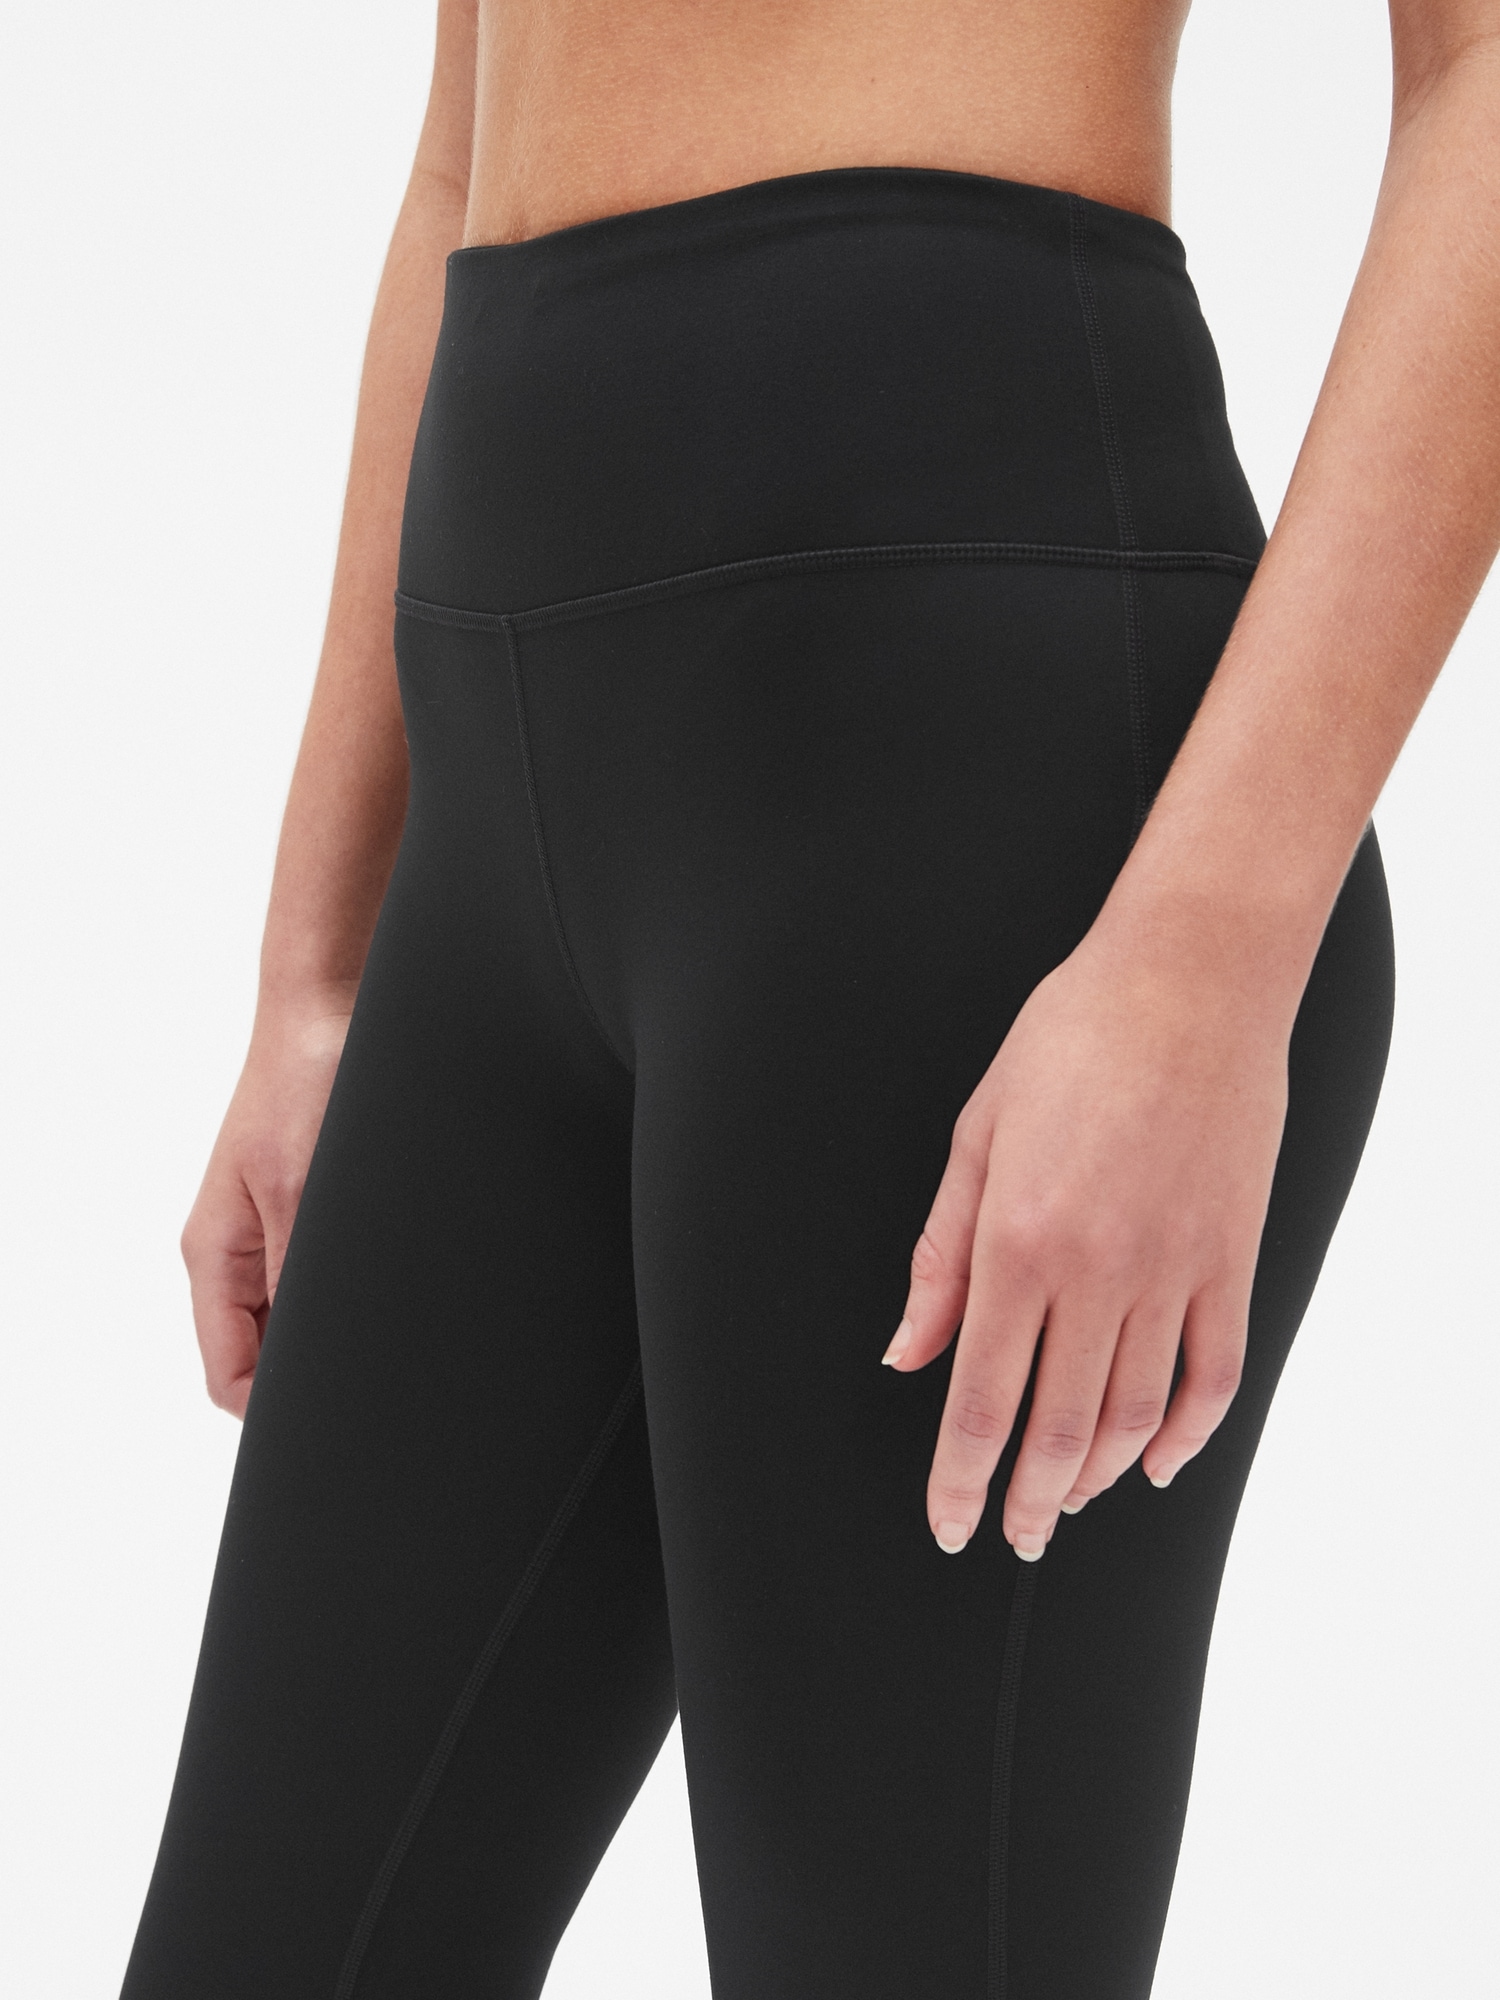 Gap Fit gFast HighRise Sculpt Compression Capris  Me and My Big Butt  Tested These Workout Pants So You Dont Have To  POPSUGAR Fitness Photo 6